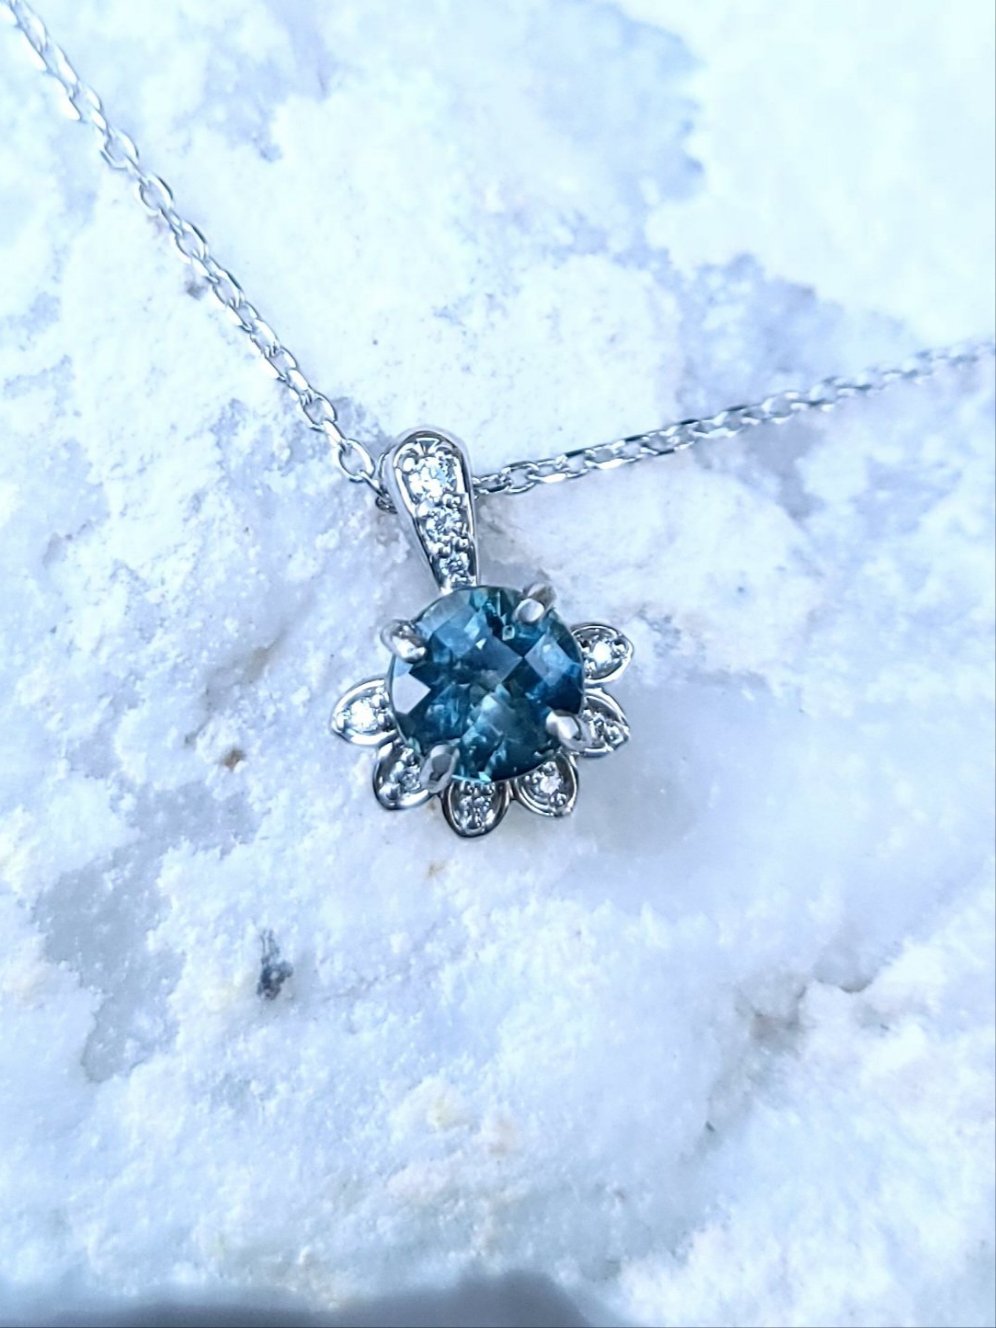 Pendant - Montana Sapphire .74 CT Teal Checkerboard Round Cut set in 14k White Gold Diamond Solitaire Flower